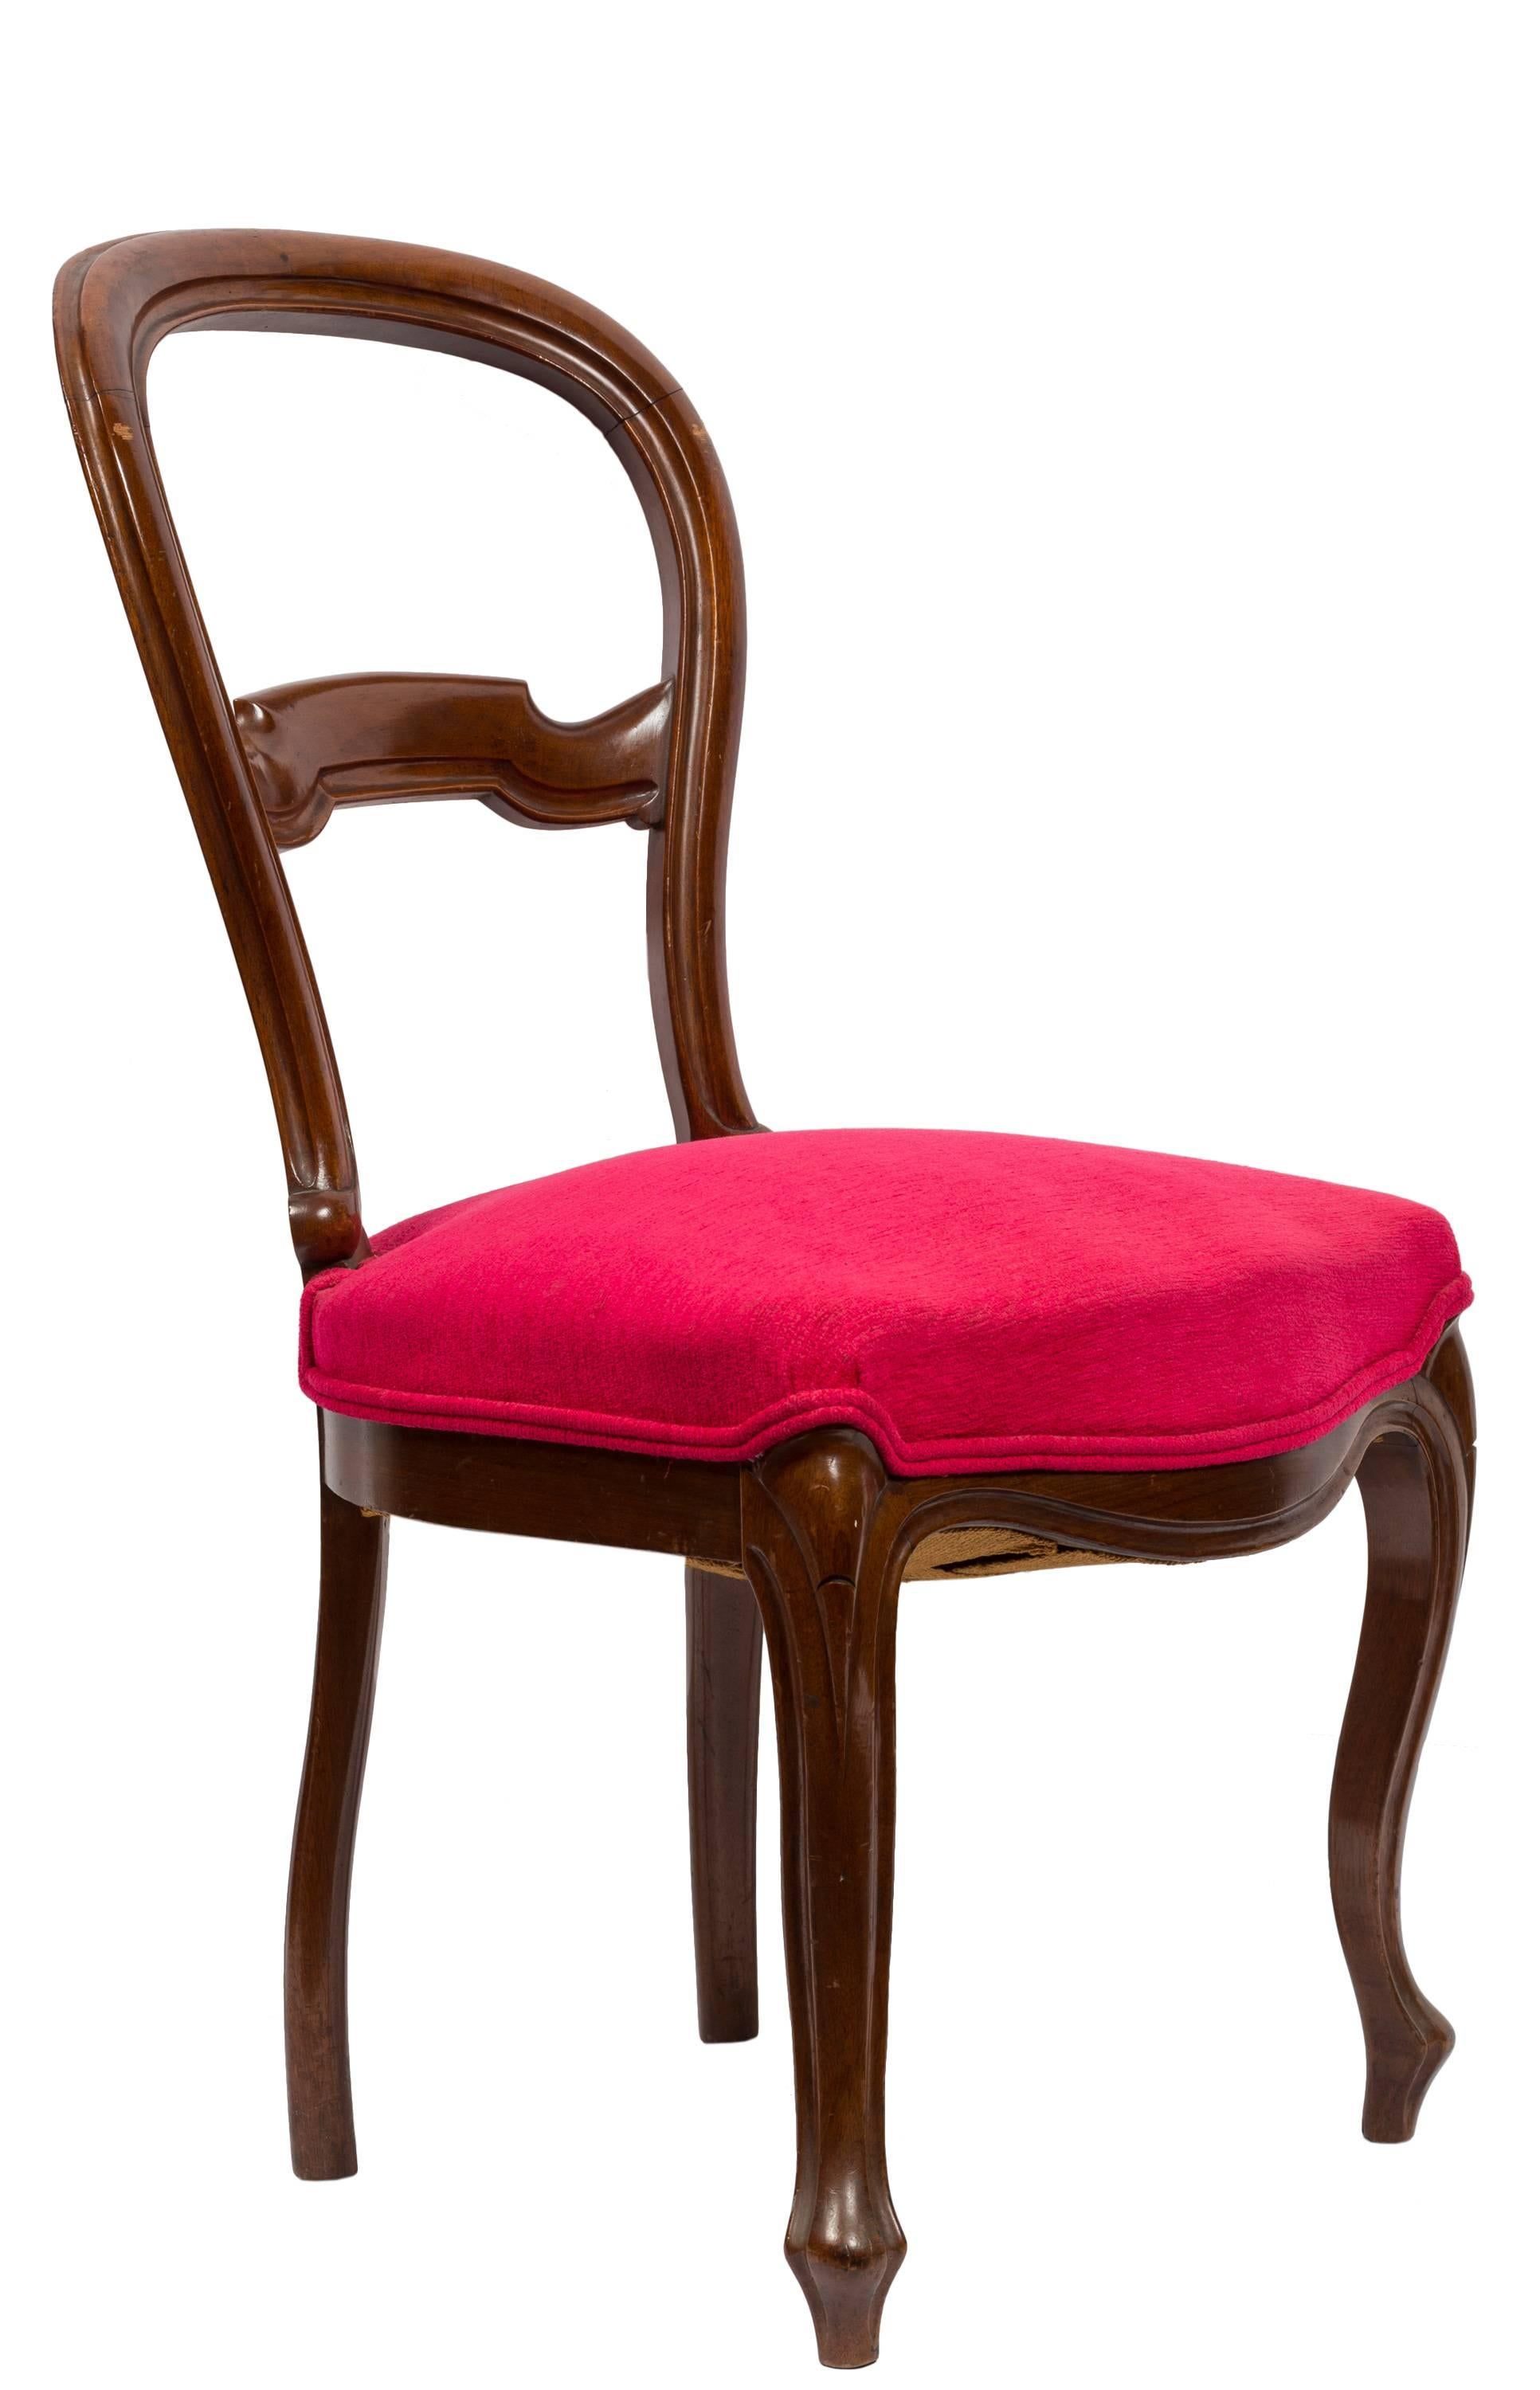 Carved Pair of Unmatched 19th Century Walnut and Magenta Red Fabric Spanish Chairs